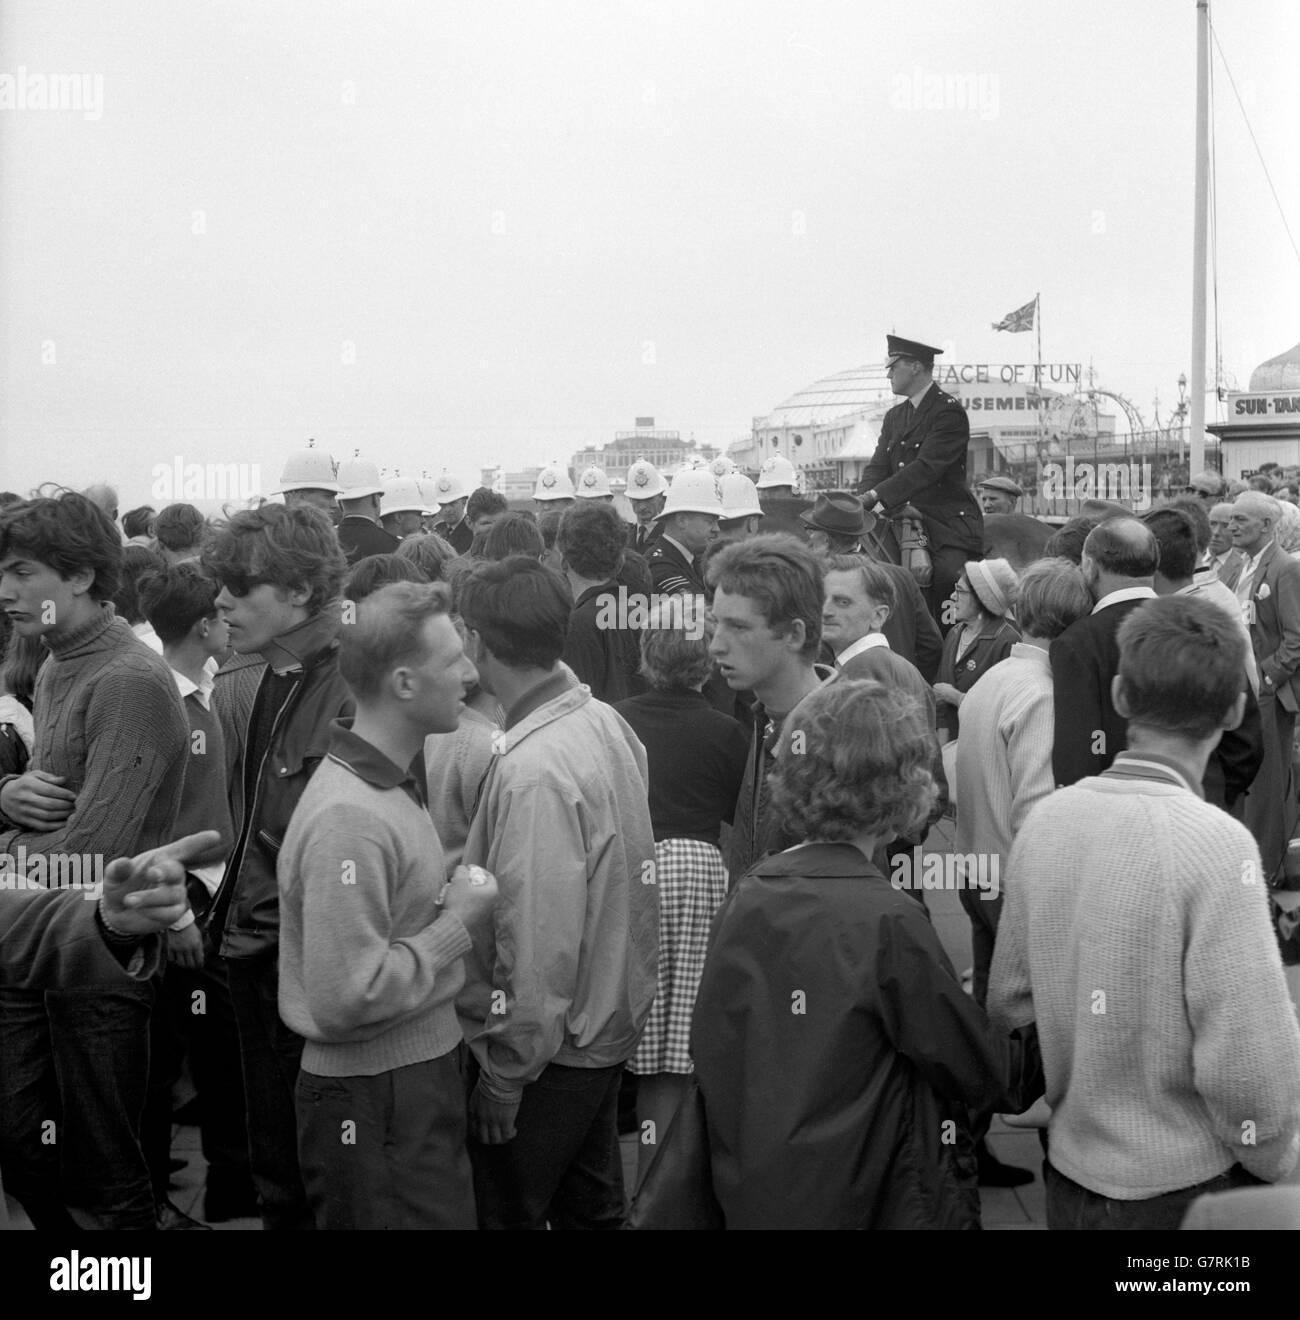 A mounted policeman and white helmeted colleagues move among the crowd on the seafront at Brighton, Sussex, where trouble flared between rival gangs of Mods and Rockers. There was a sharp battle between rival gangs on the steps of the Aquarium, when deckchairs and rubbish were thrown. Some of the rockers escaped by dropping 15ft over a wall to the promenade below. There were also pitched battles at Margate, Kent, where two youths were taken to hospital with stab wounds. Stock Photo